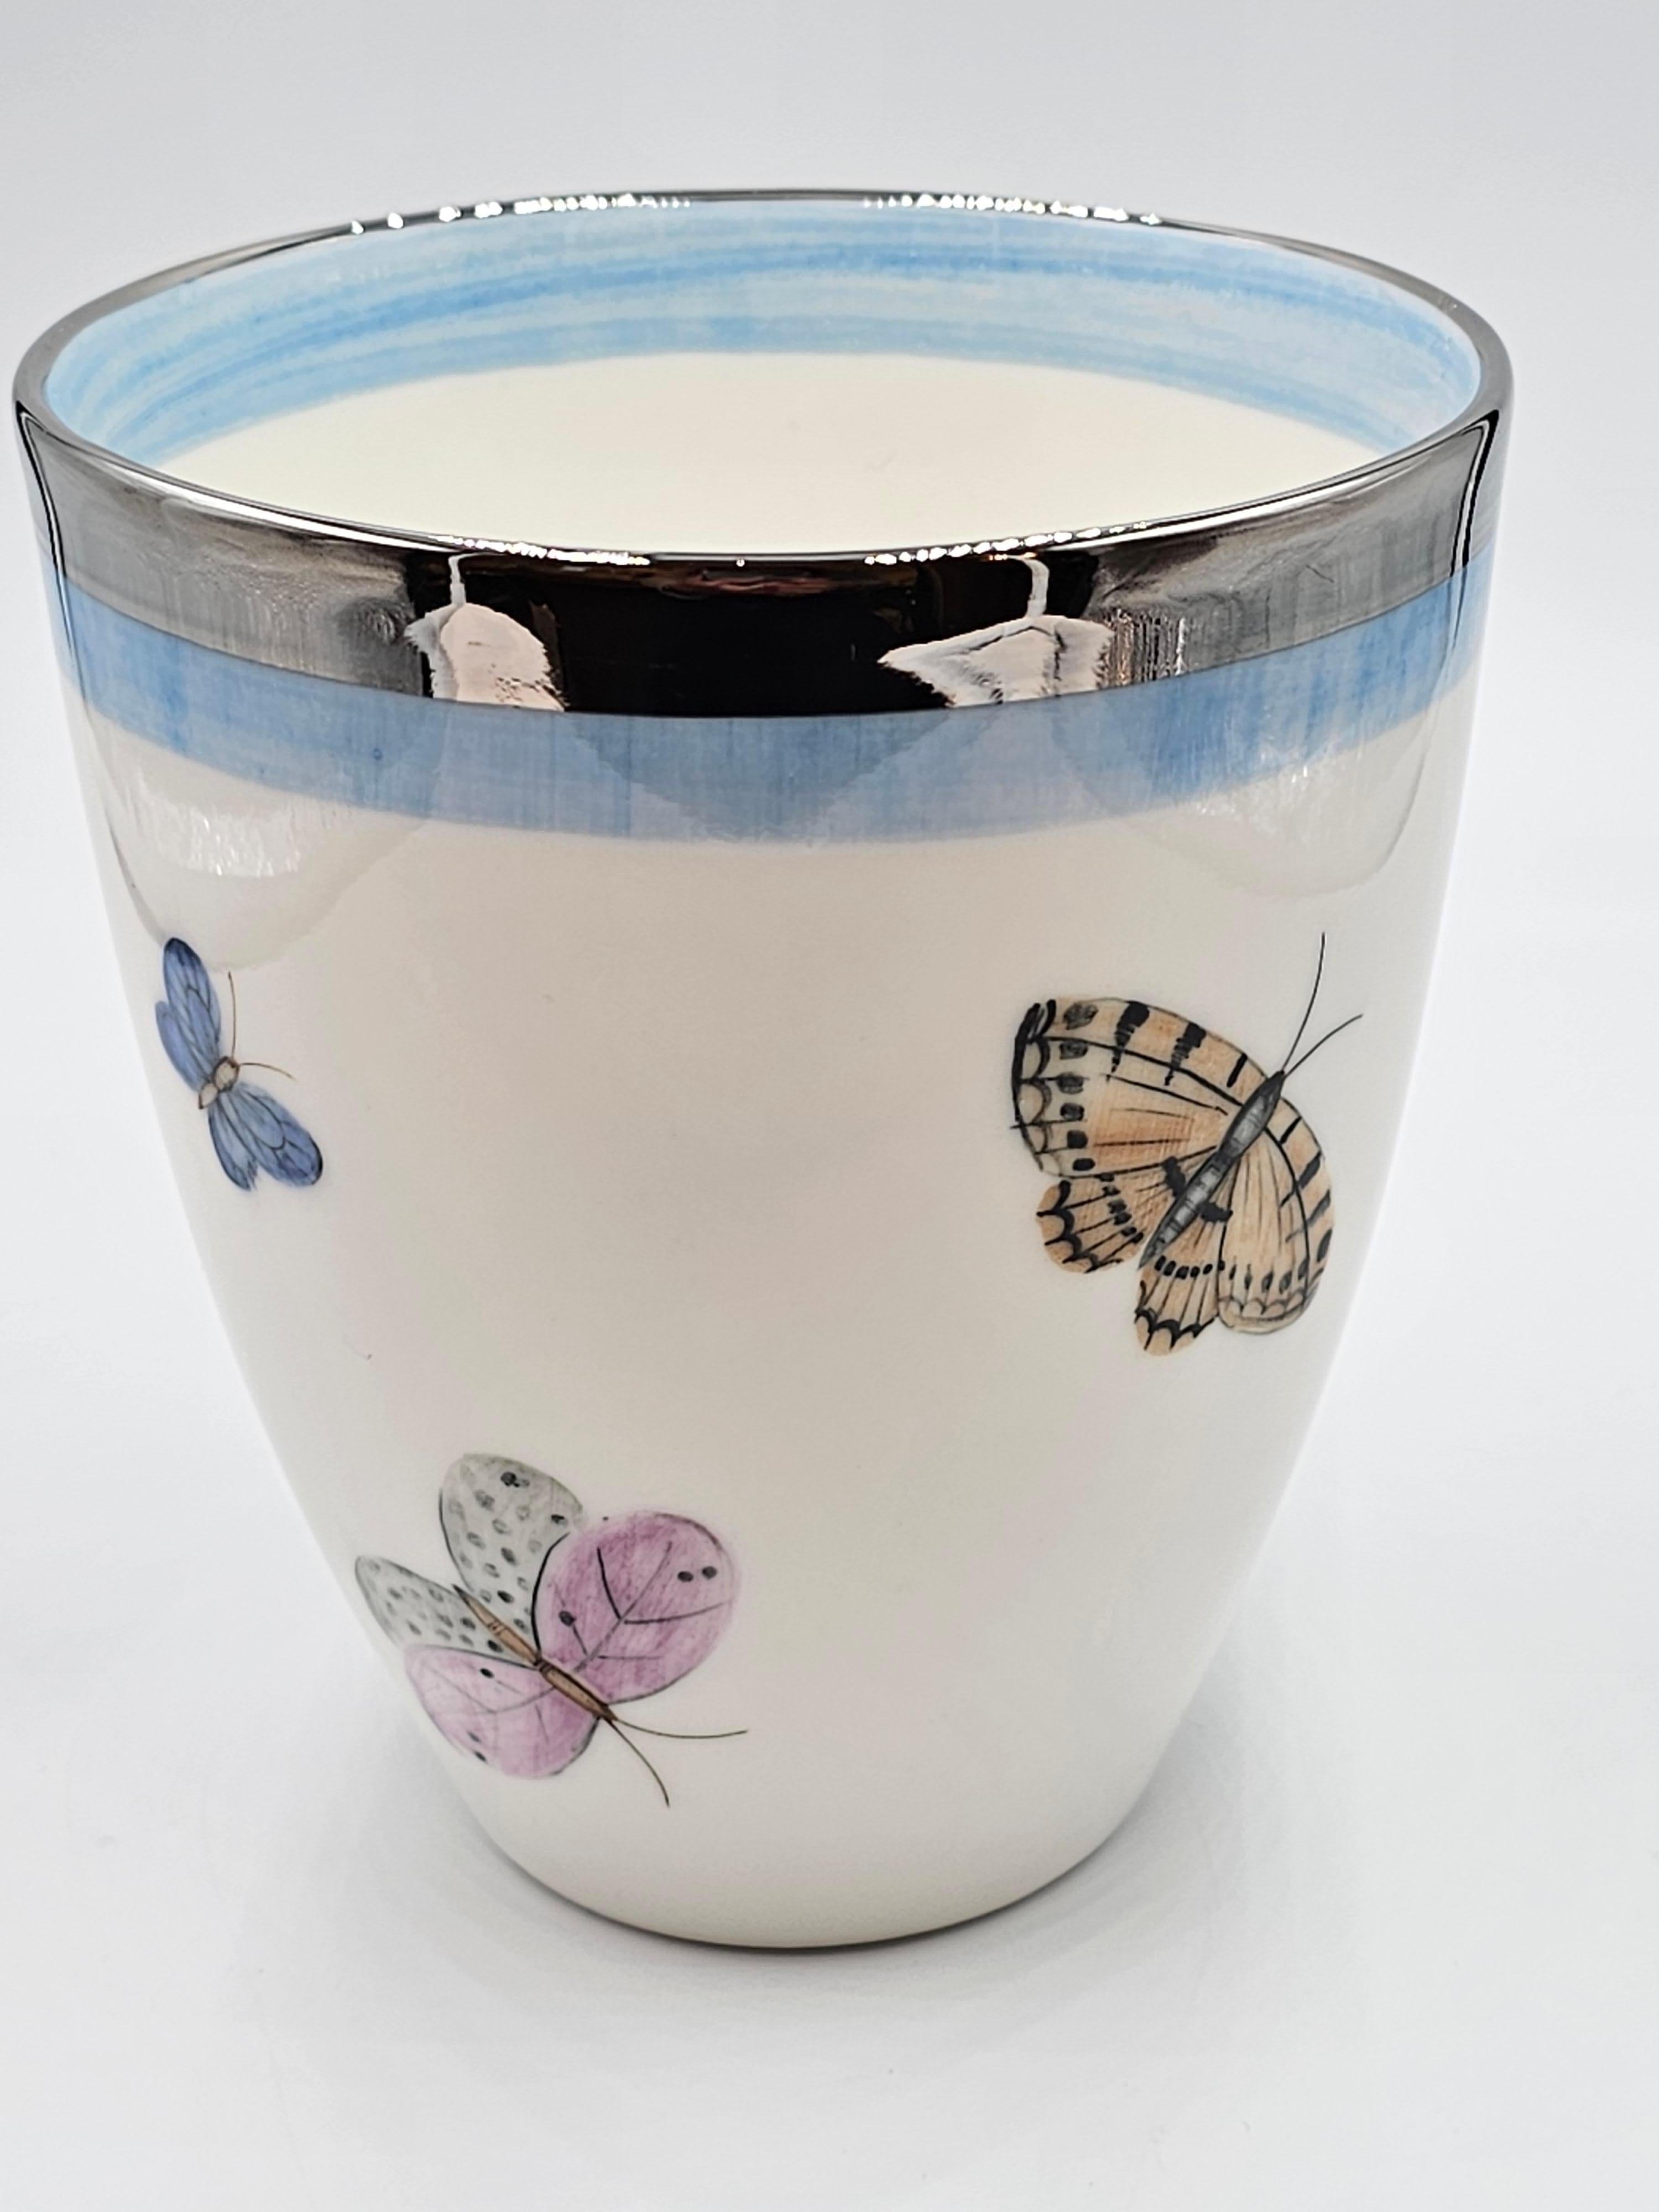 Hands-free painted porcelain vase with a butterflies decor all around. Rimmed with a pale blue color rim and a platinum rim. Completely made by hand in Bavaria/Germany with a exclusive decor for Sofina Boutique Kitzbühel.
Looks beautiful with fresh